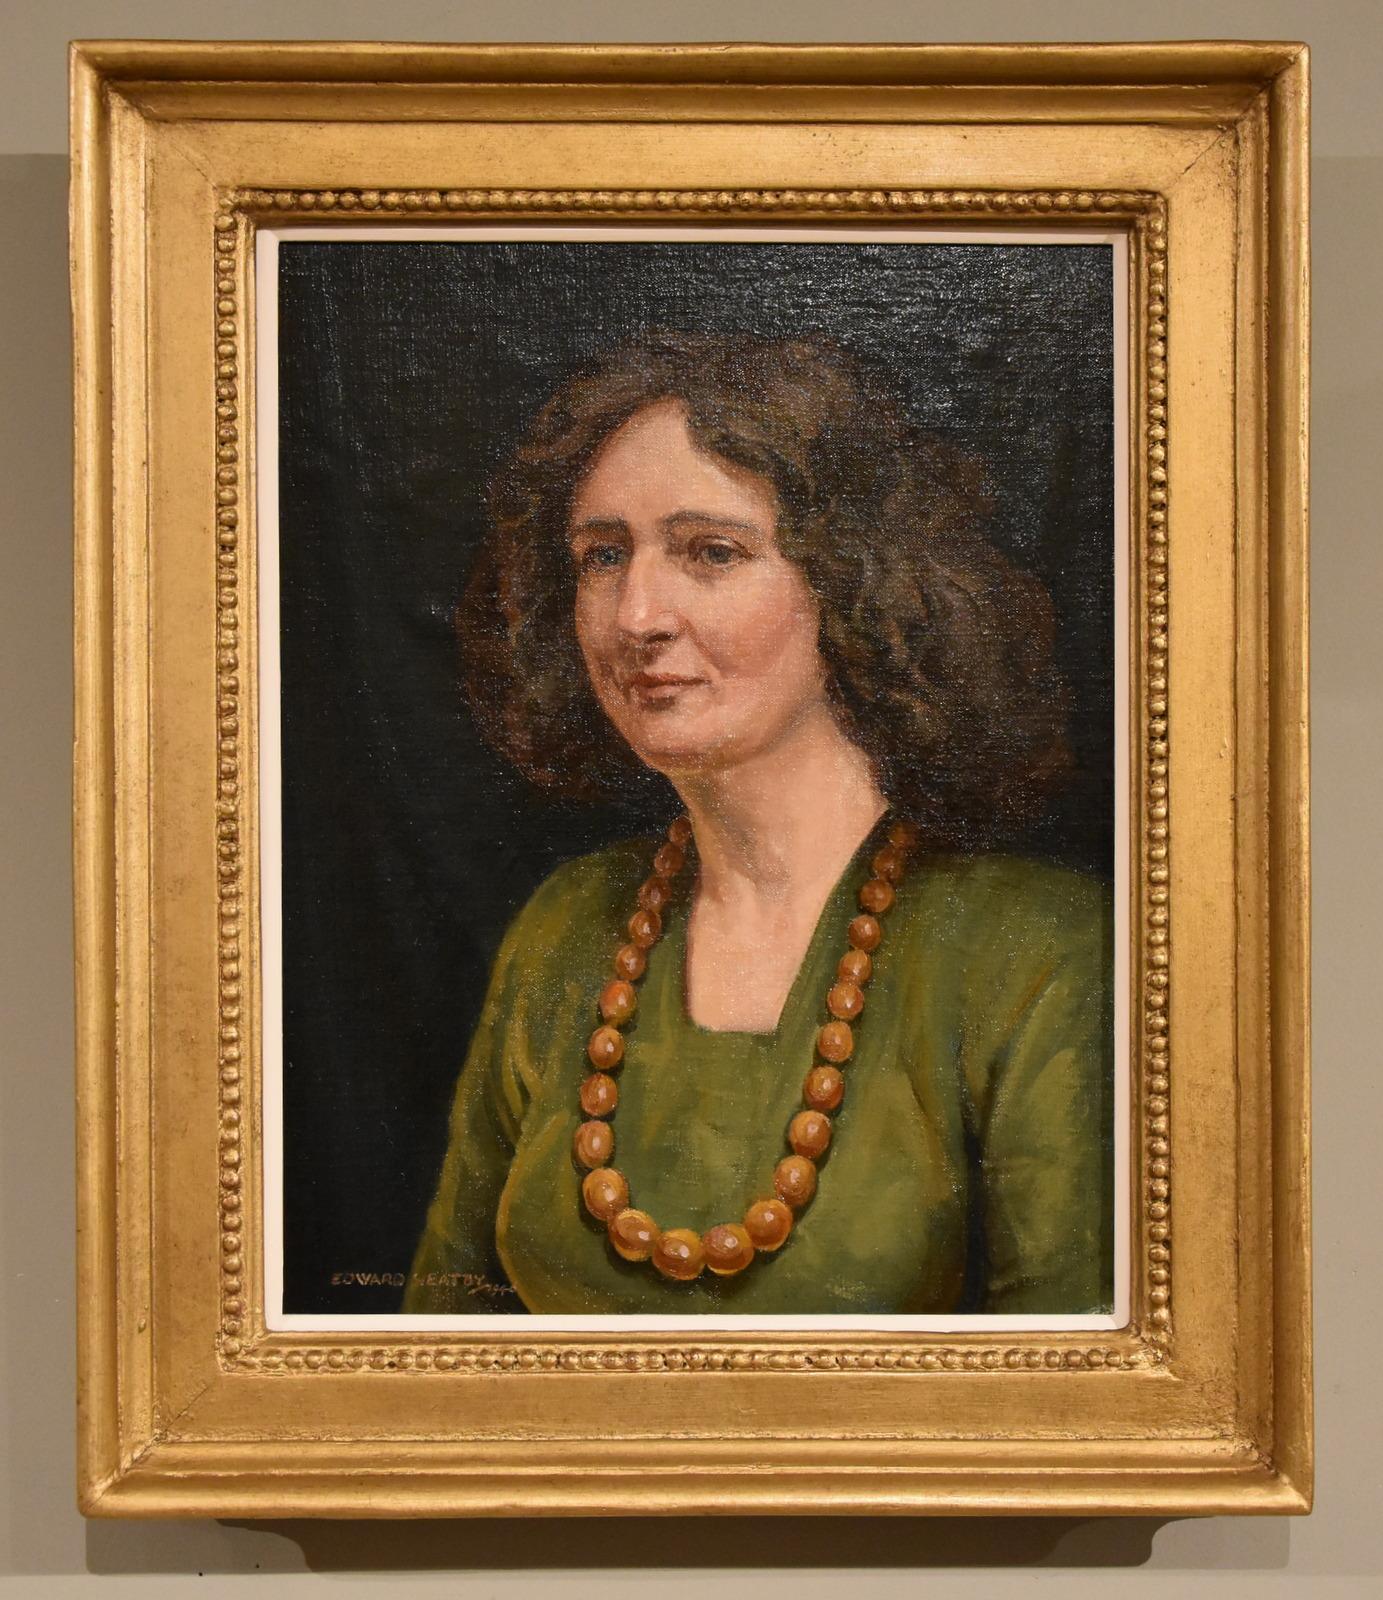 Oil Painting by Edward Mossforth Neatby "Portrait of a Lady" 1888 - 1949 Leeds born portrait painter who studied at the Royal College of Art and Slade. He exhibited at the Royal Academy where he was elected a member. Oil on board. Signed and Dated